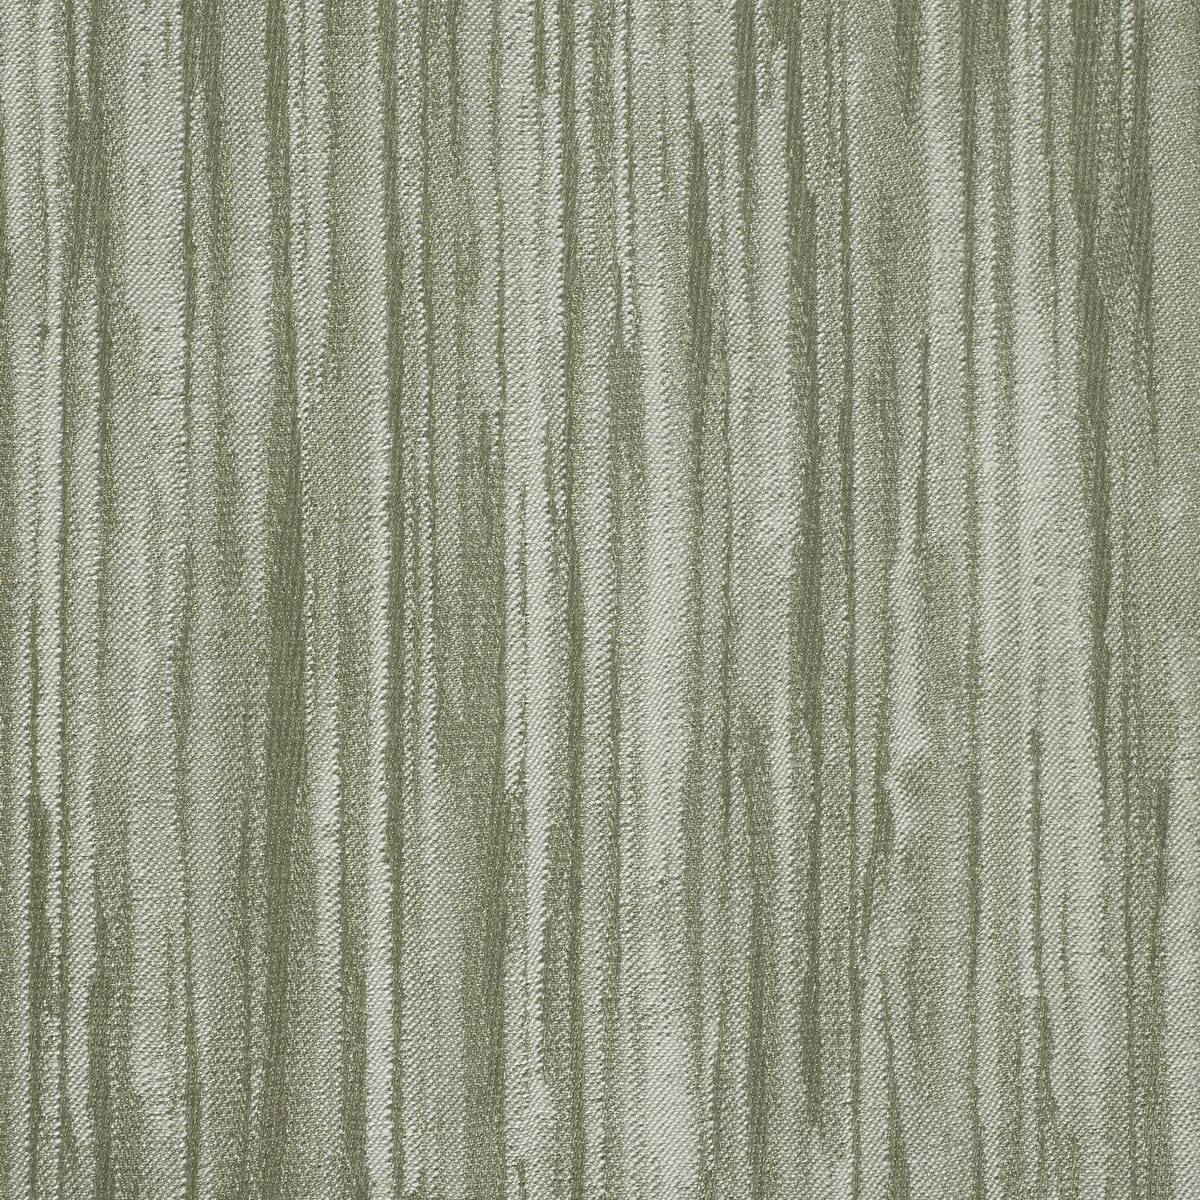 Cherwell Willow Fabric by Sanderson